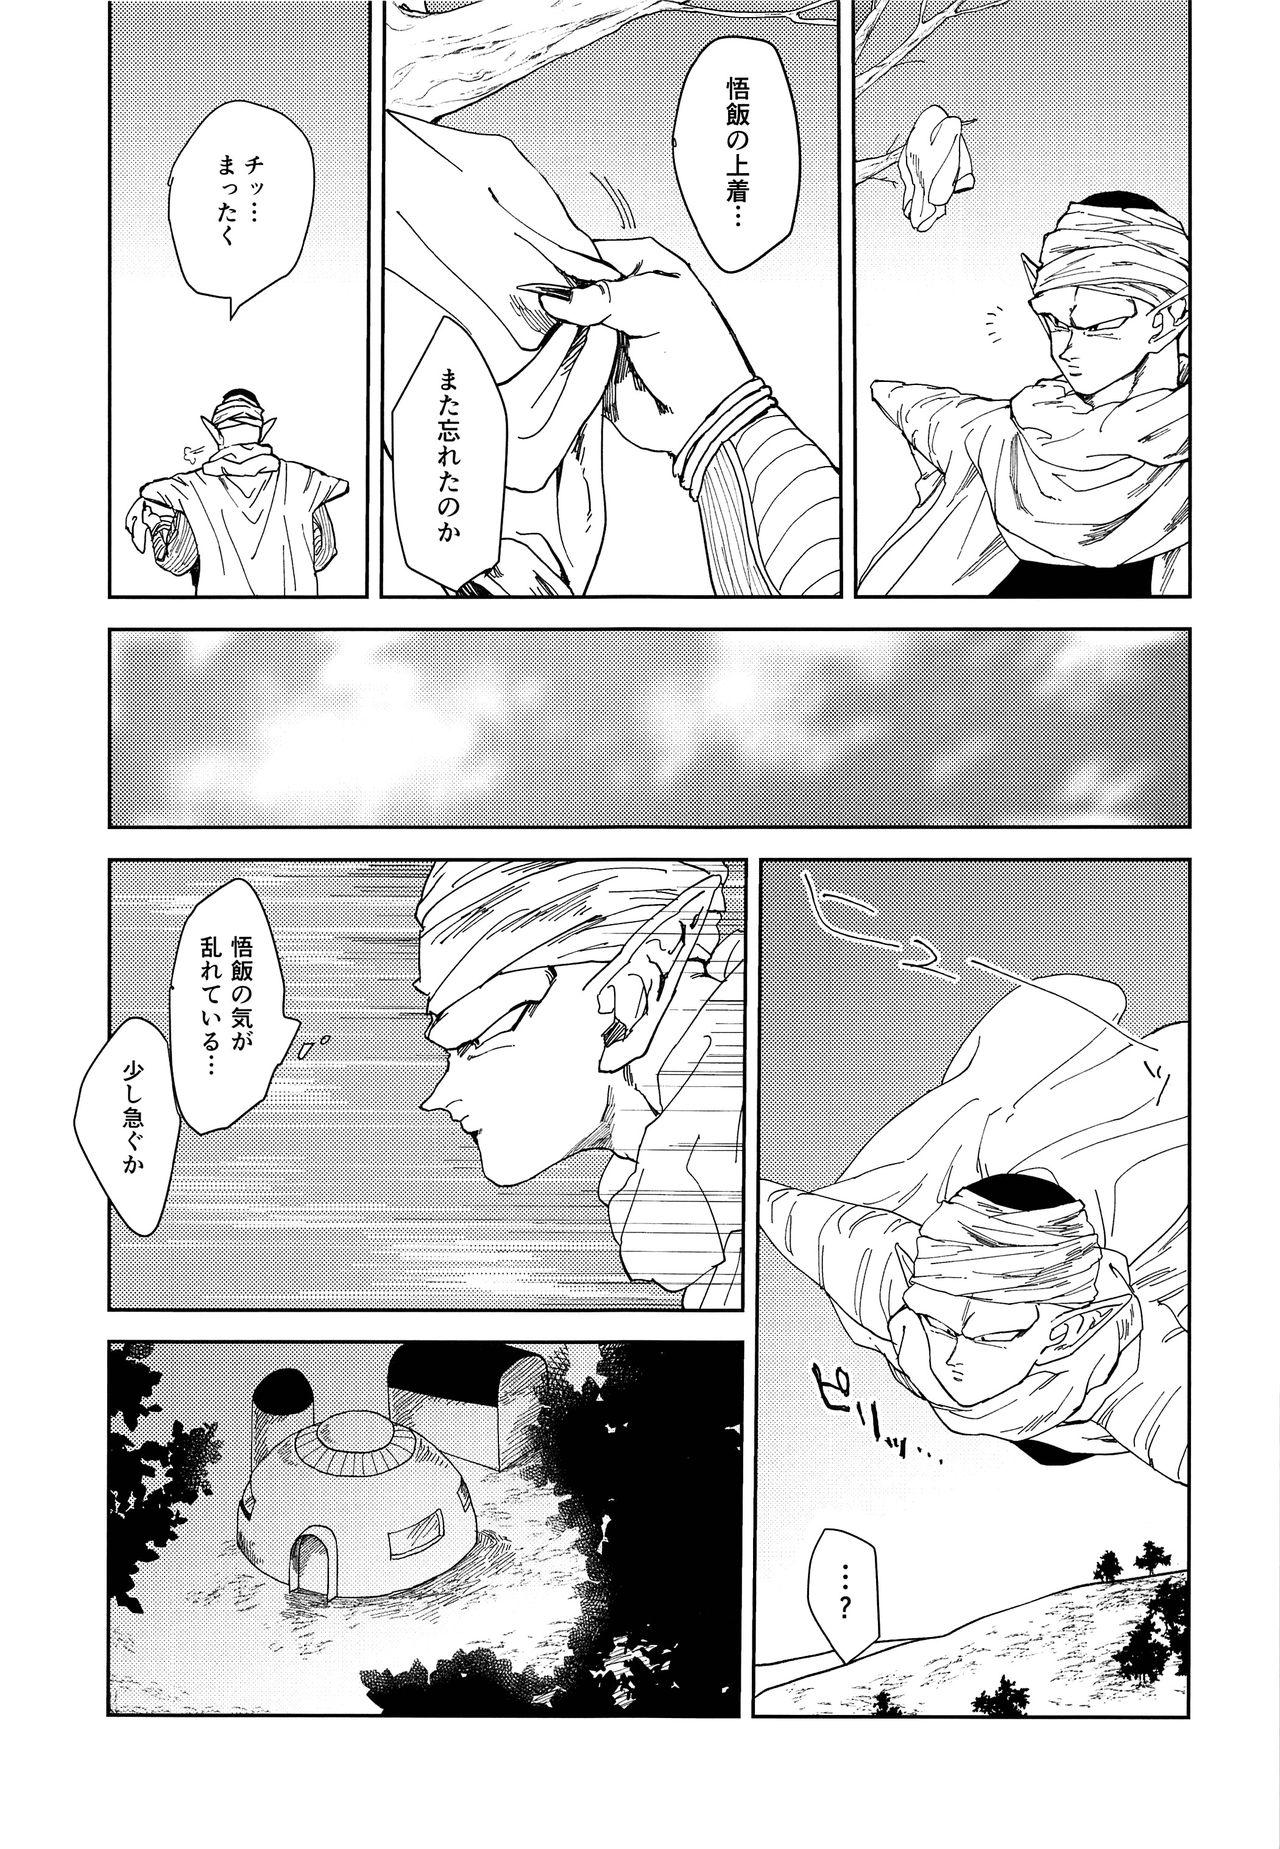 Transexual Oh, silly boy! - Dragon ball z From - Page 4